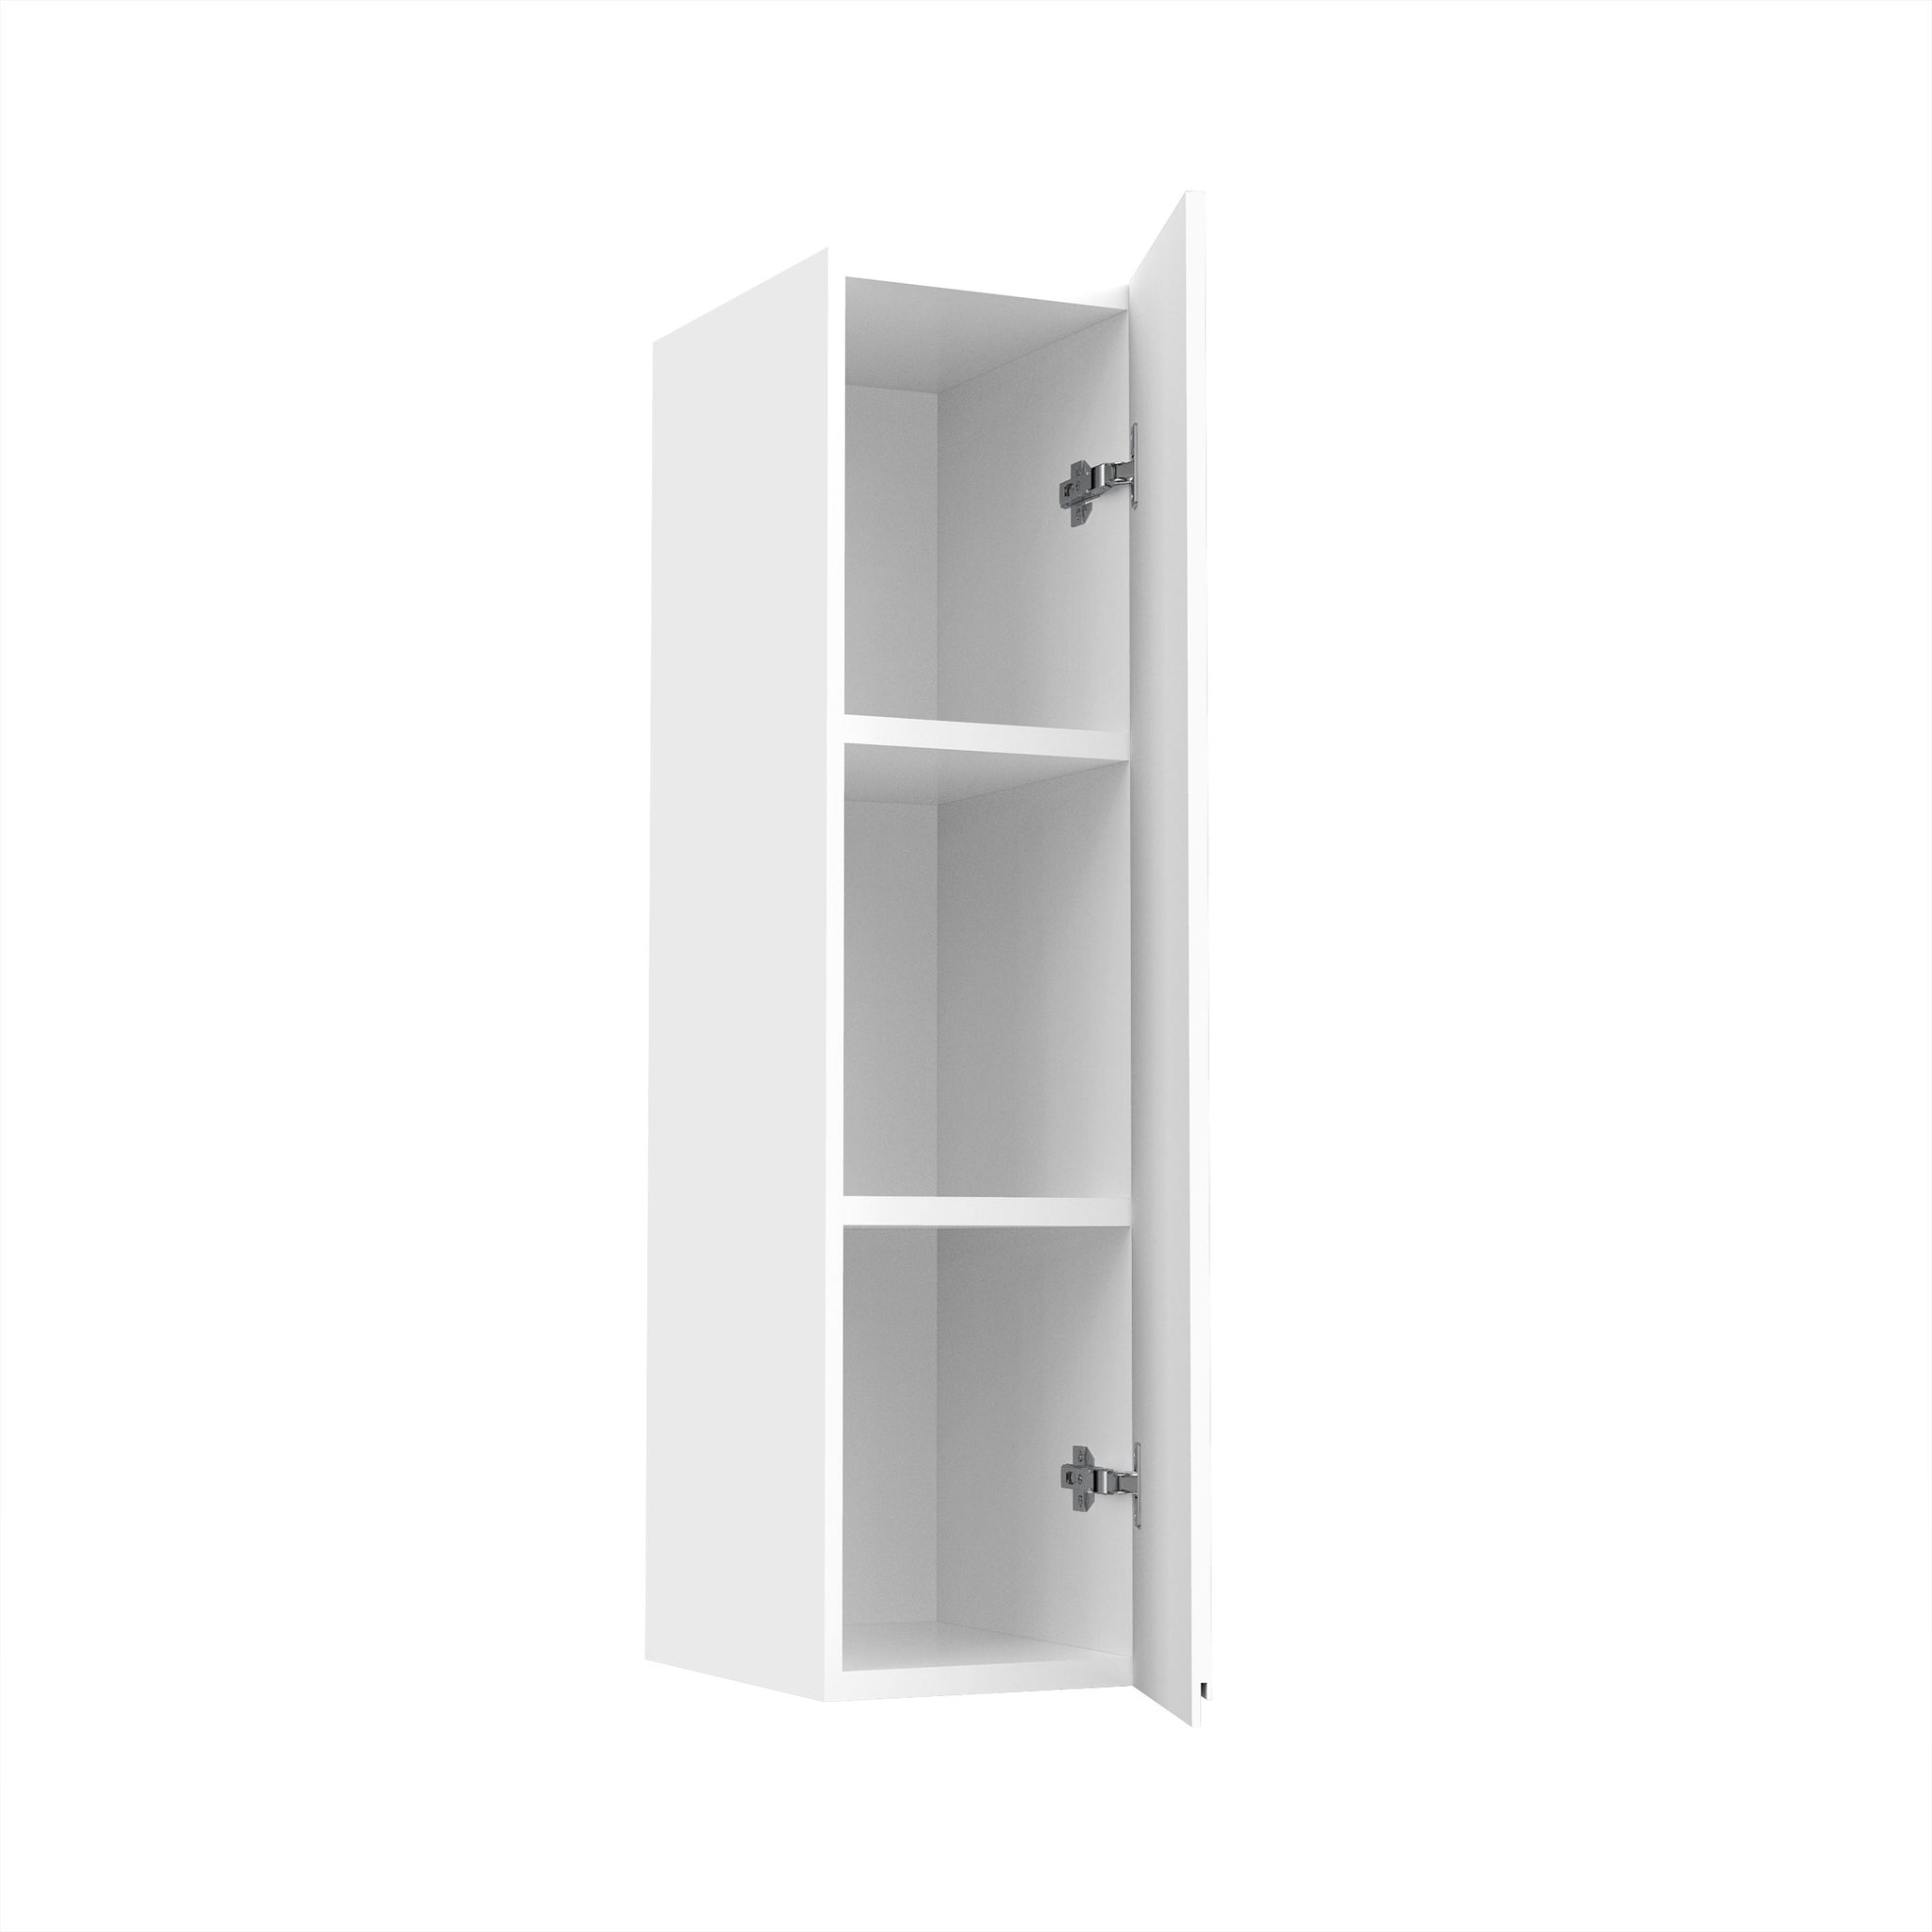 Kitchen Wall Cabinet - RTA - Lacquer white - Single Door Wall Cabinet | 9"W x 36"H x 12"D